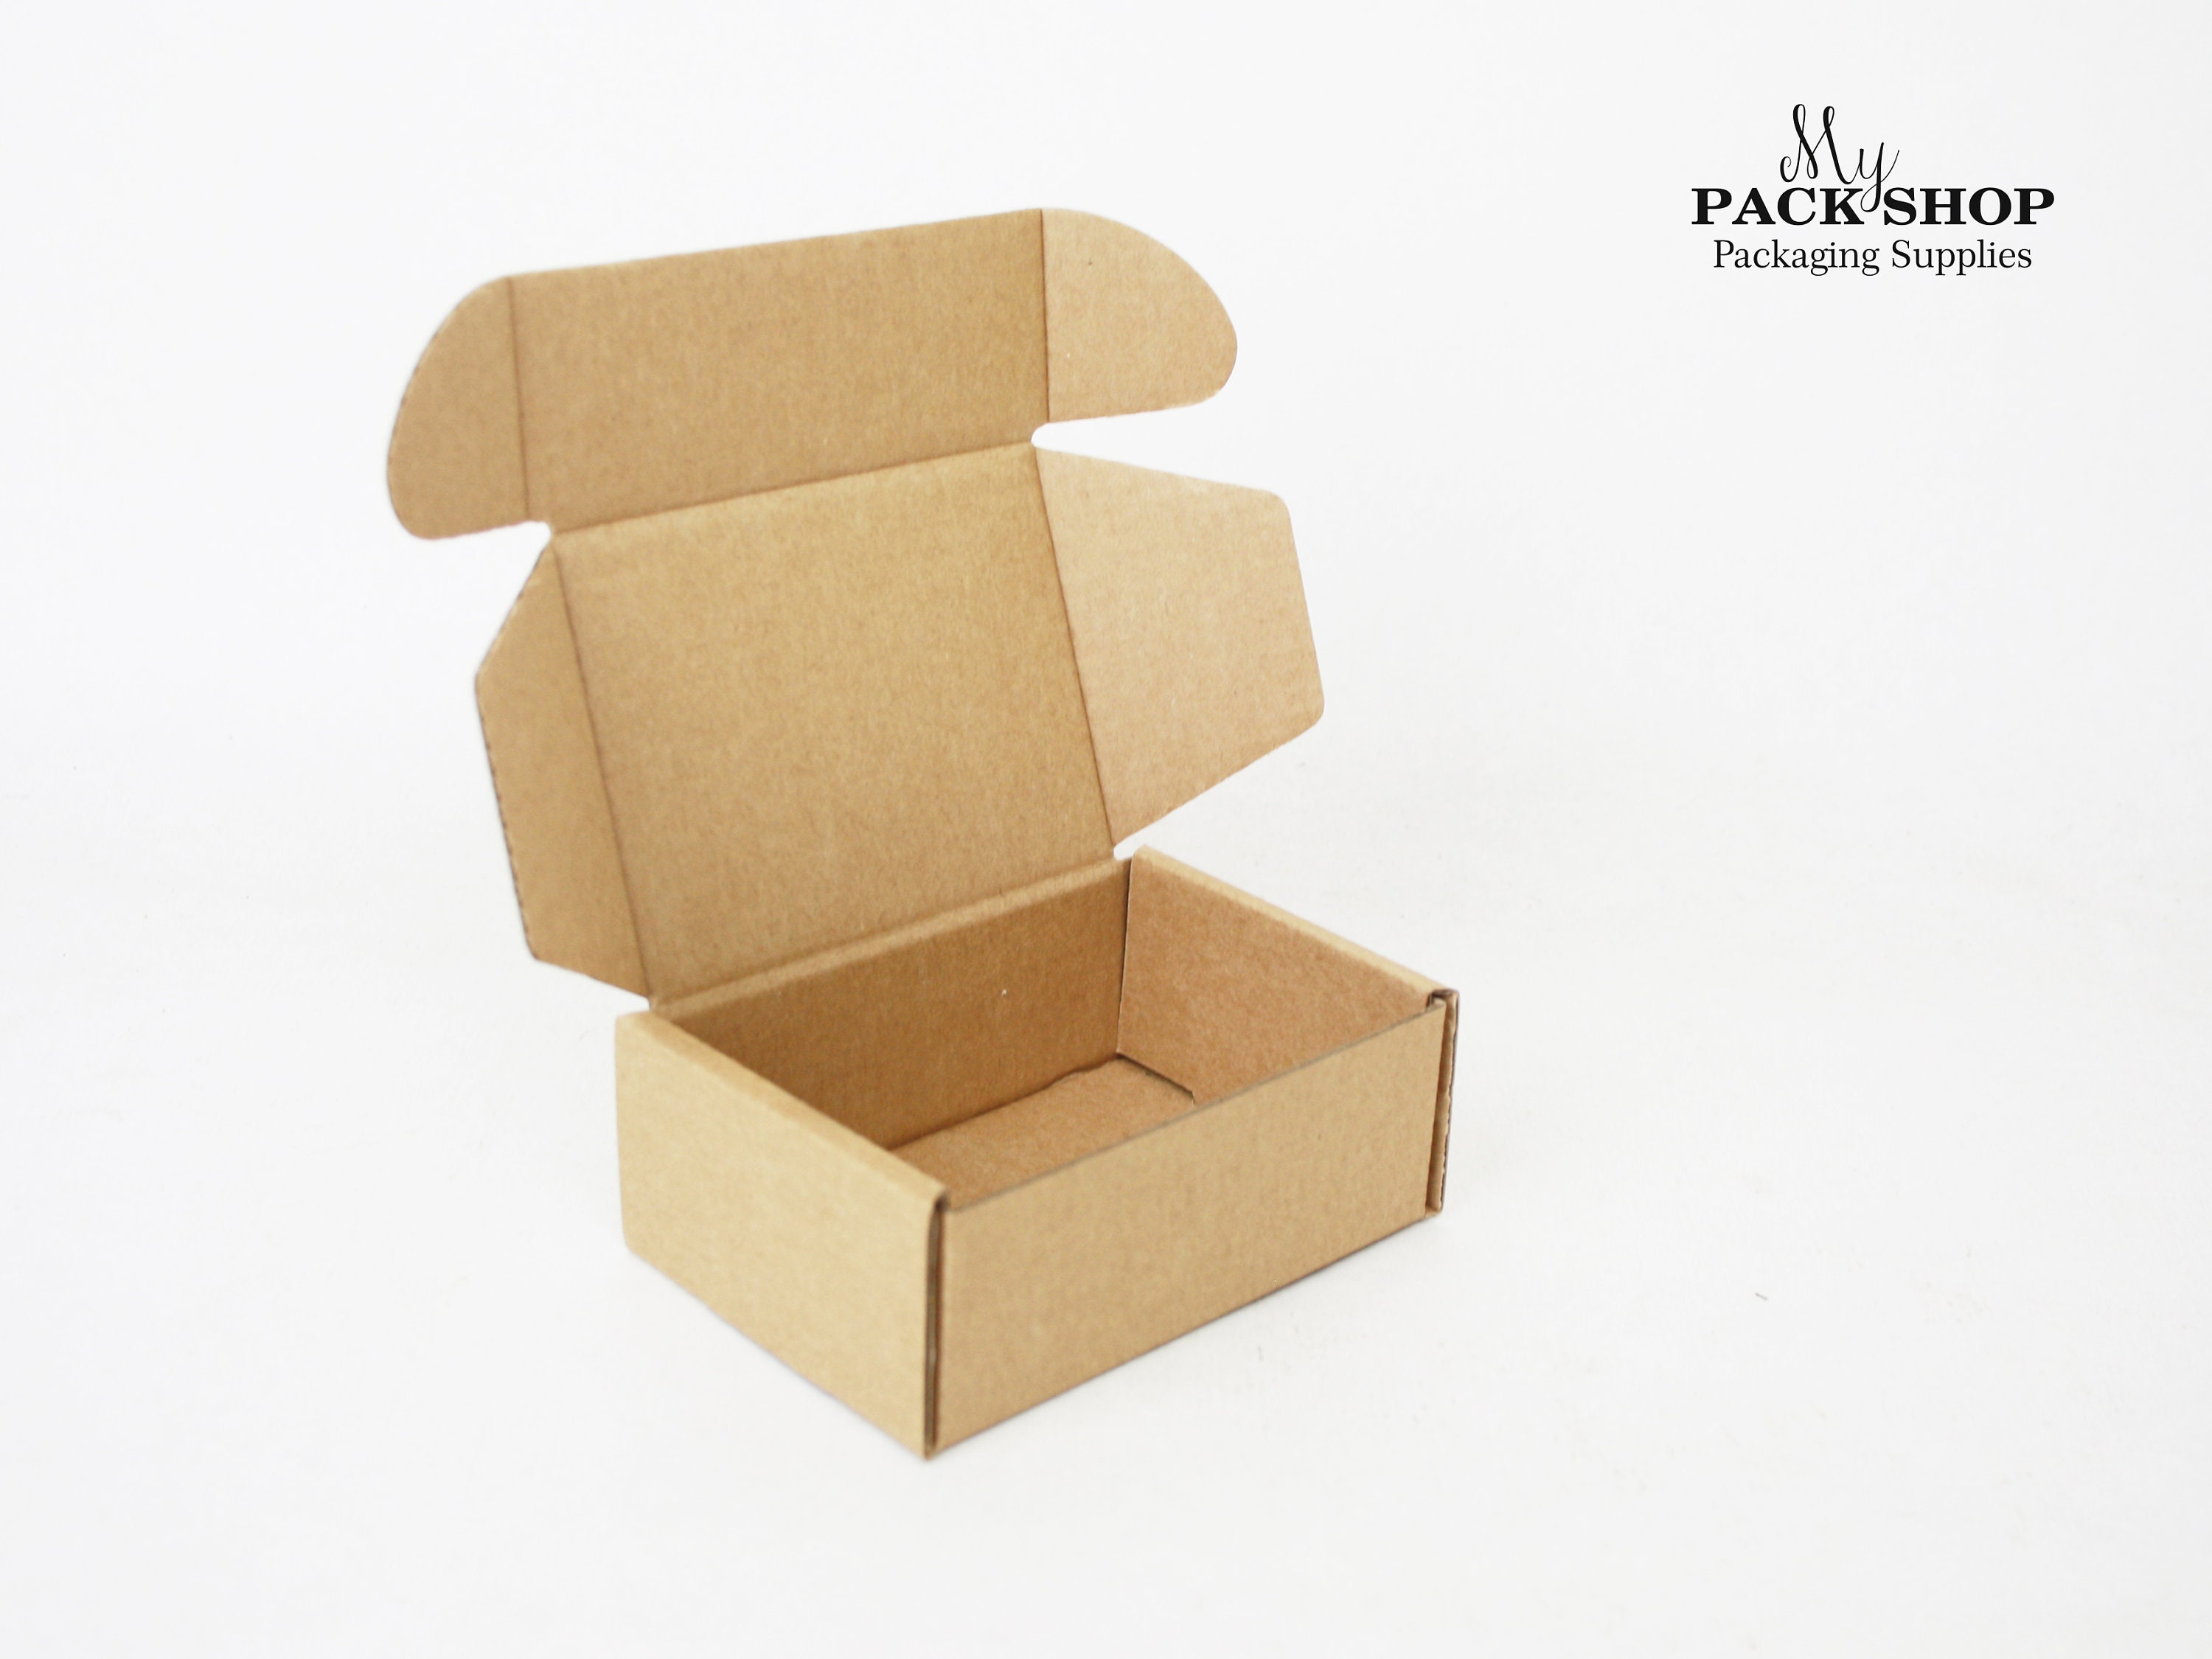 Custom Soap Packaging Boxes in pocket-friendly Prices